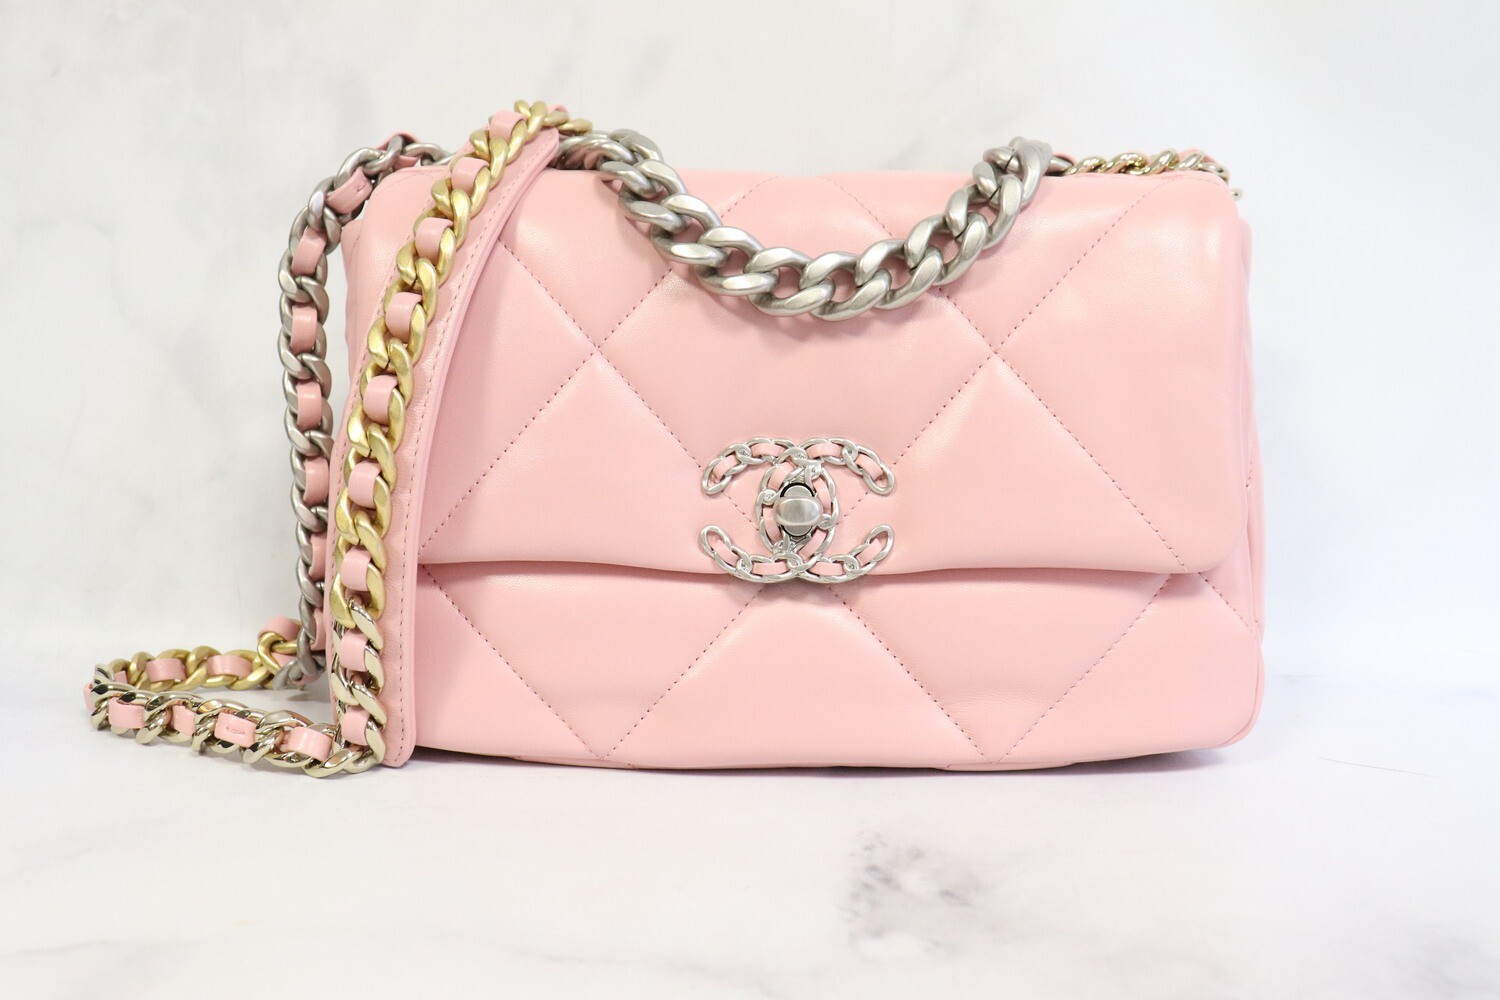 Chanel 19, Medium (Small), 22C Pink Lambskin Leather, New in Box